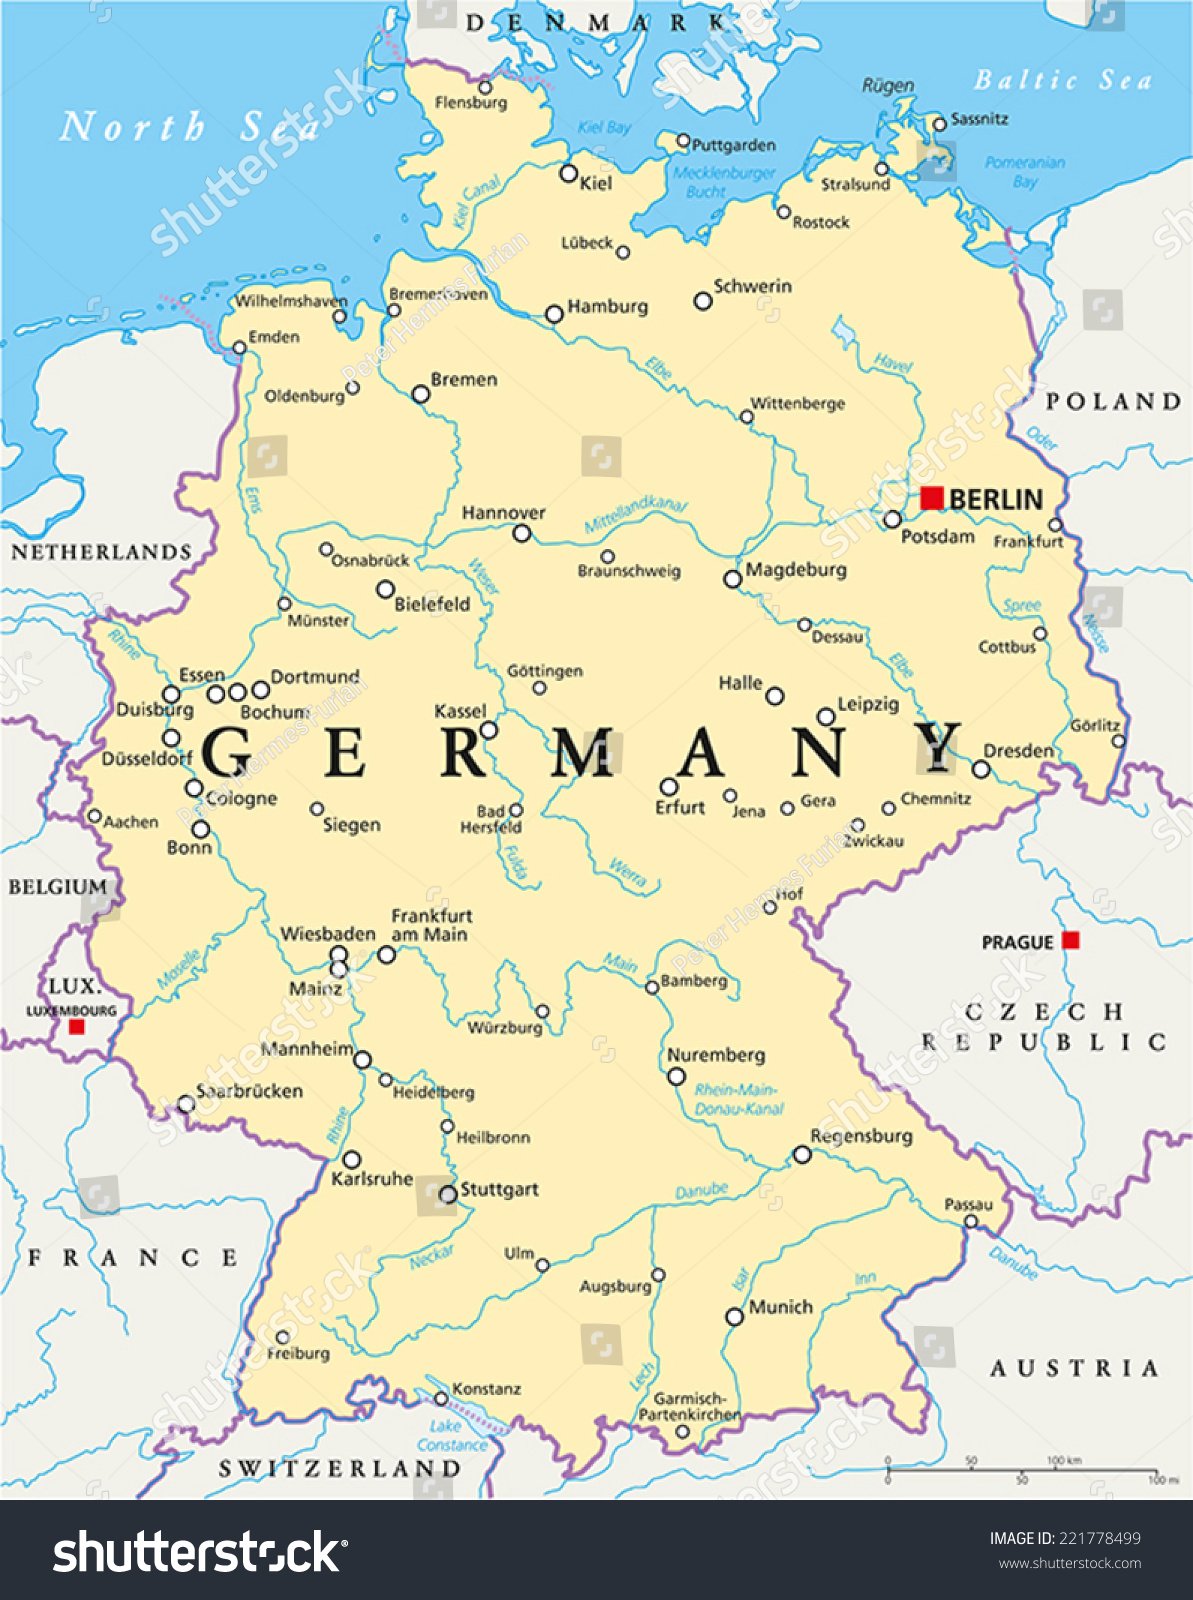 SVG of Germany Political Map with capital Berlin, national borders, most important cities, rivers and lakes. English labeling and scaling. Illustration. svg